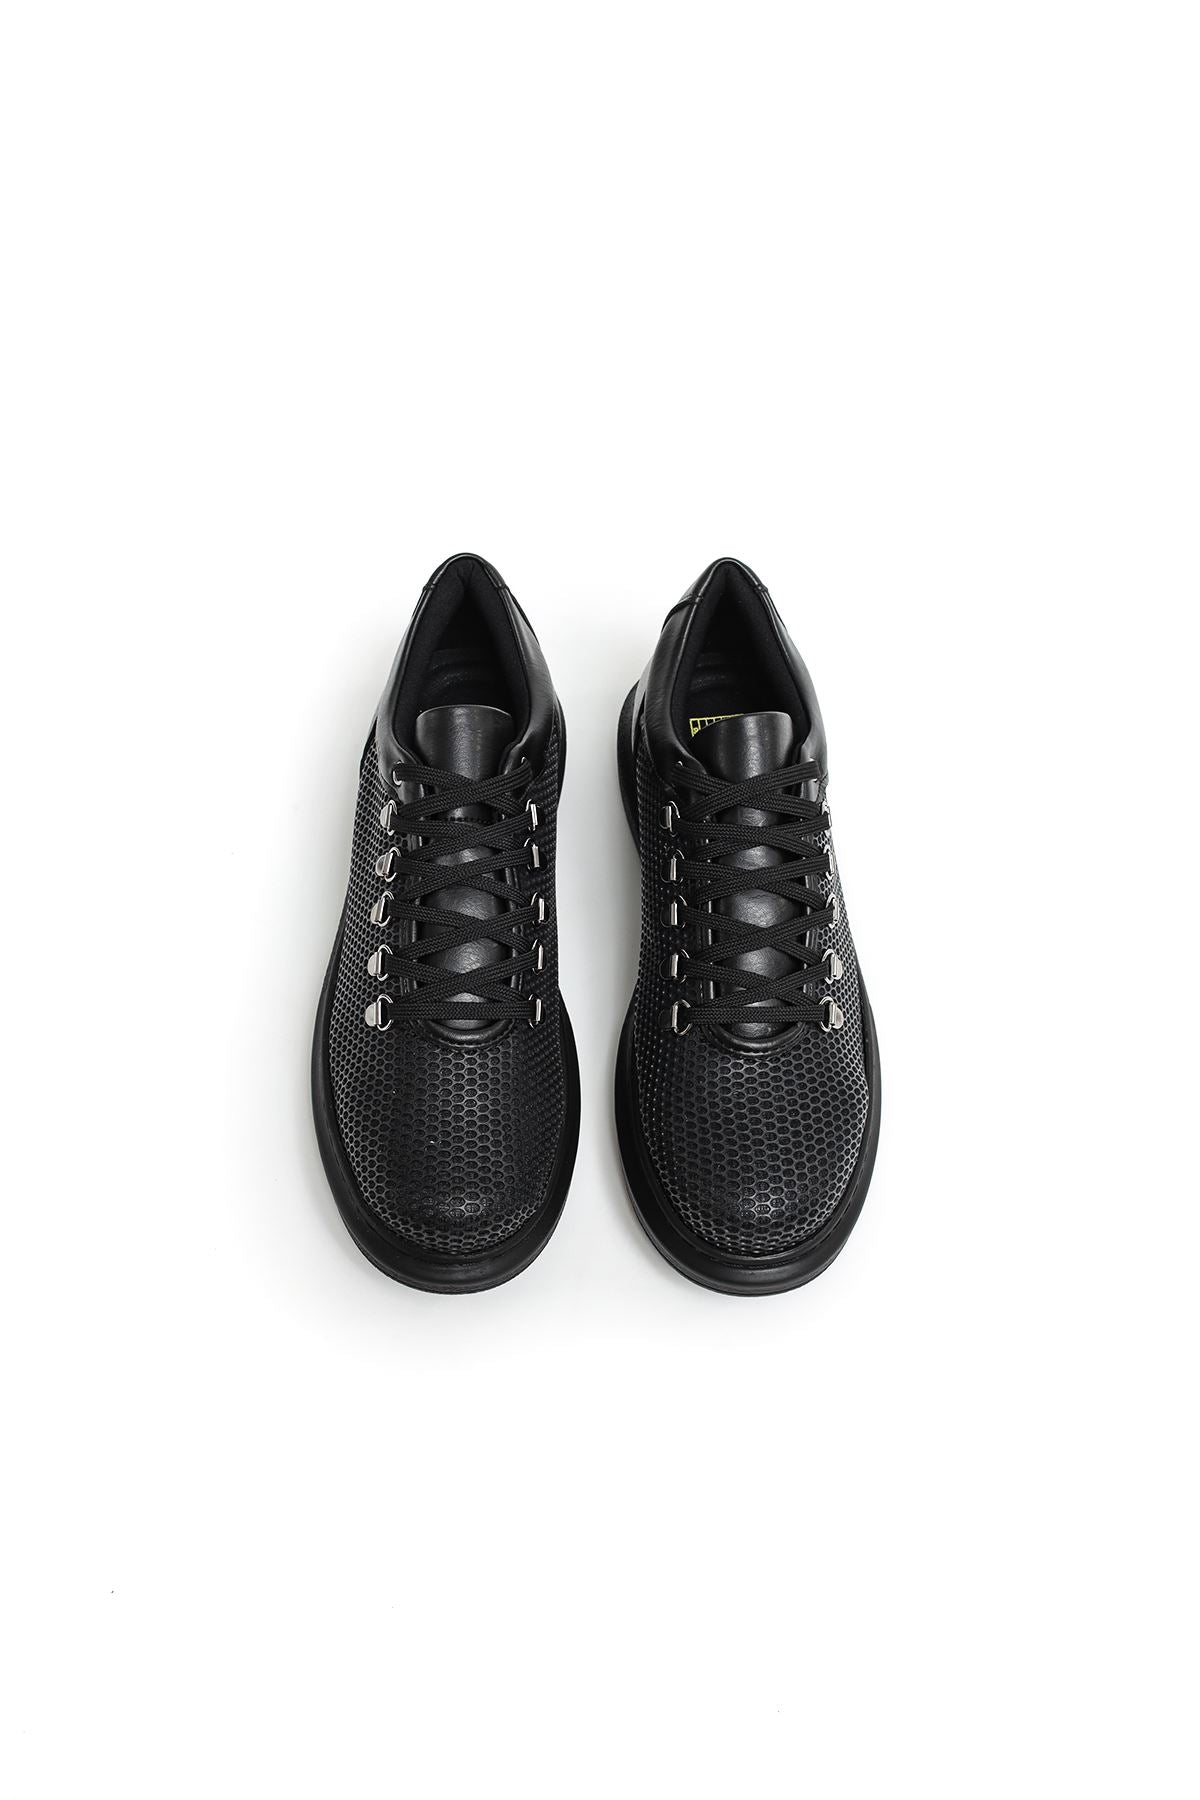 CH021 Men's Unisex Full black Honeycomb Processing Casual Sneaker Sports Shoes - STREETMODE™